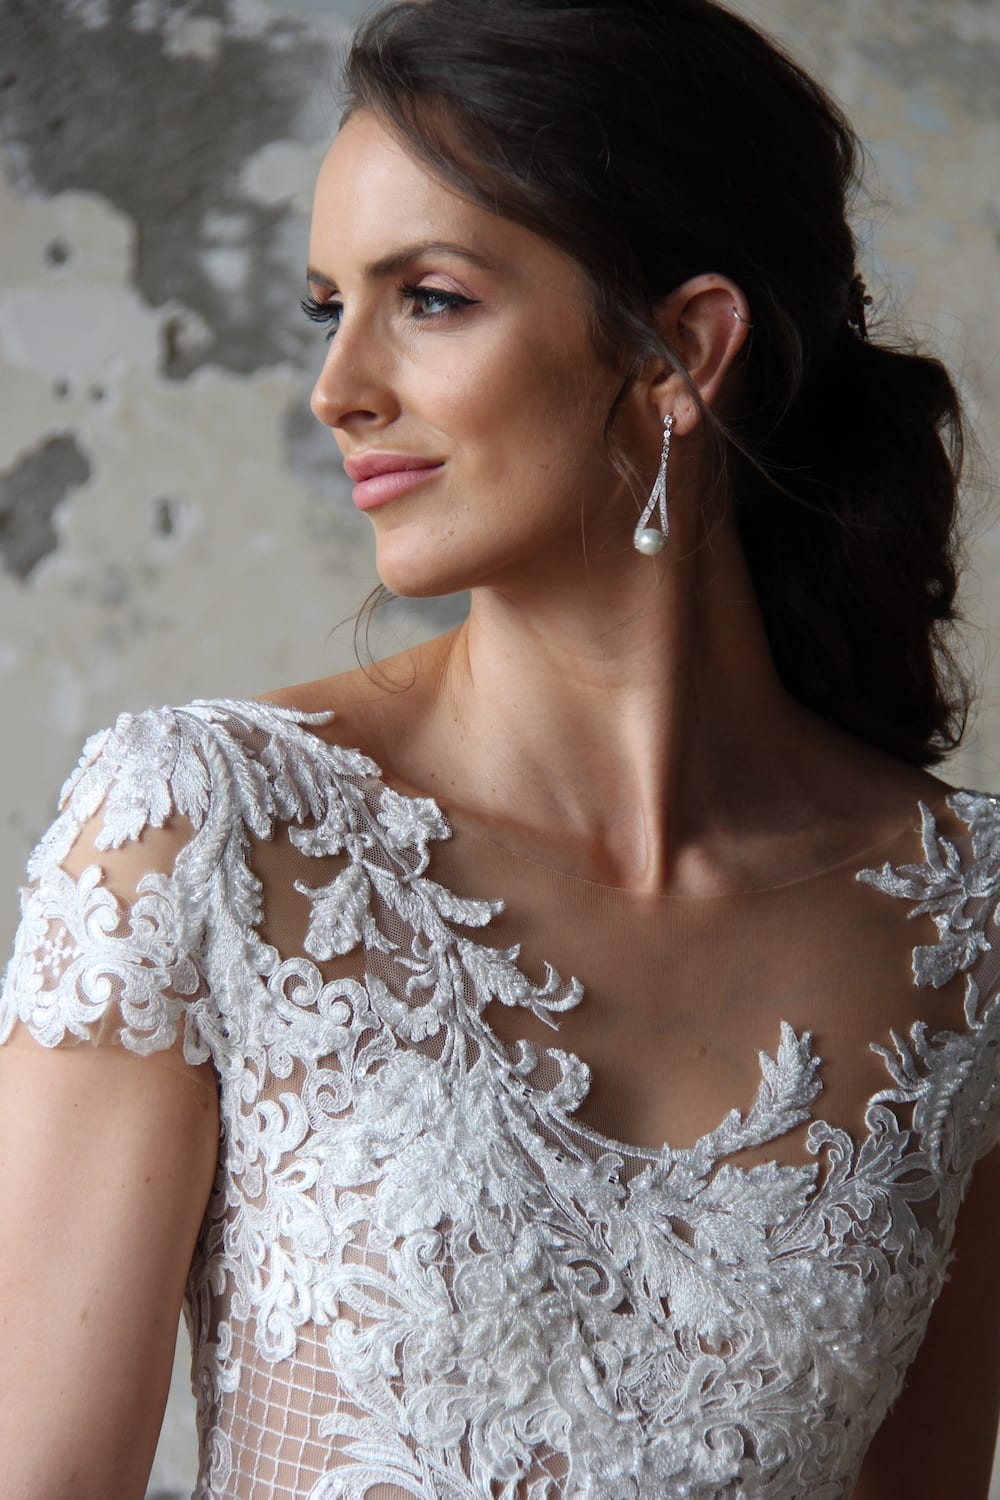 Female model wearing Vinka Design Modern Muse Wedding Dress. In chic warehouse the front detail of a gown with a sheer high neckline, low back edged with lace and a skirt with pockets.